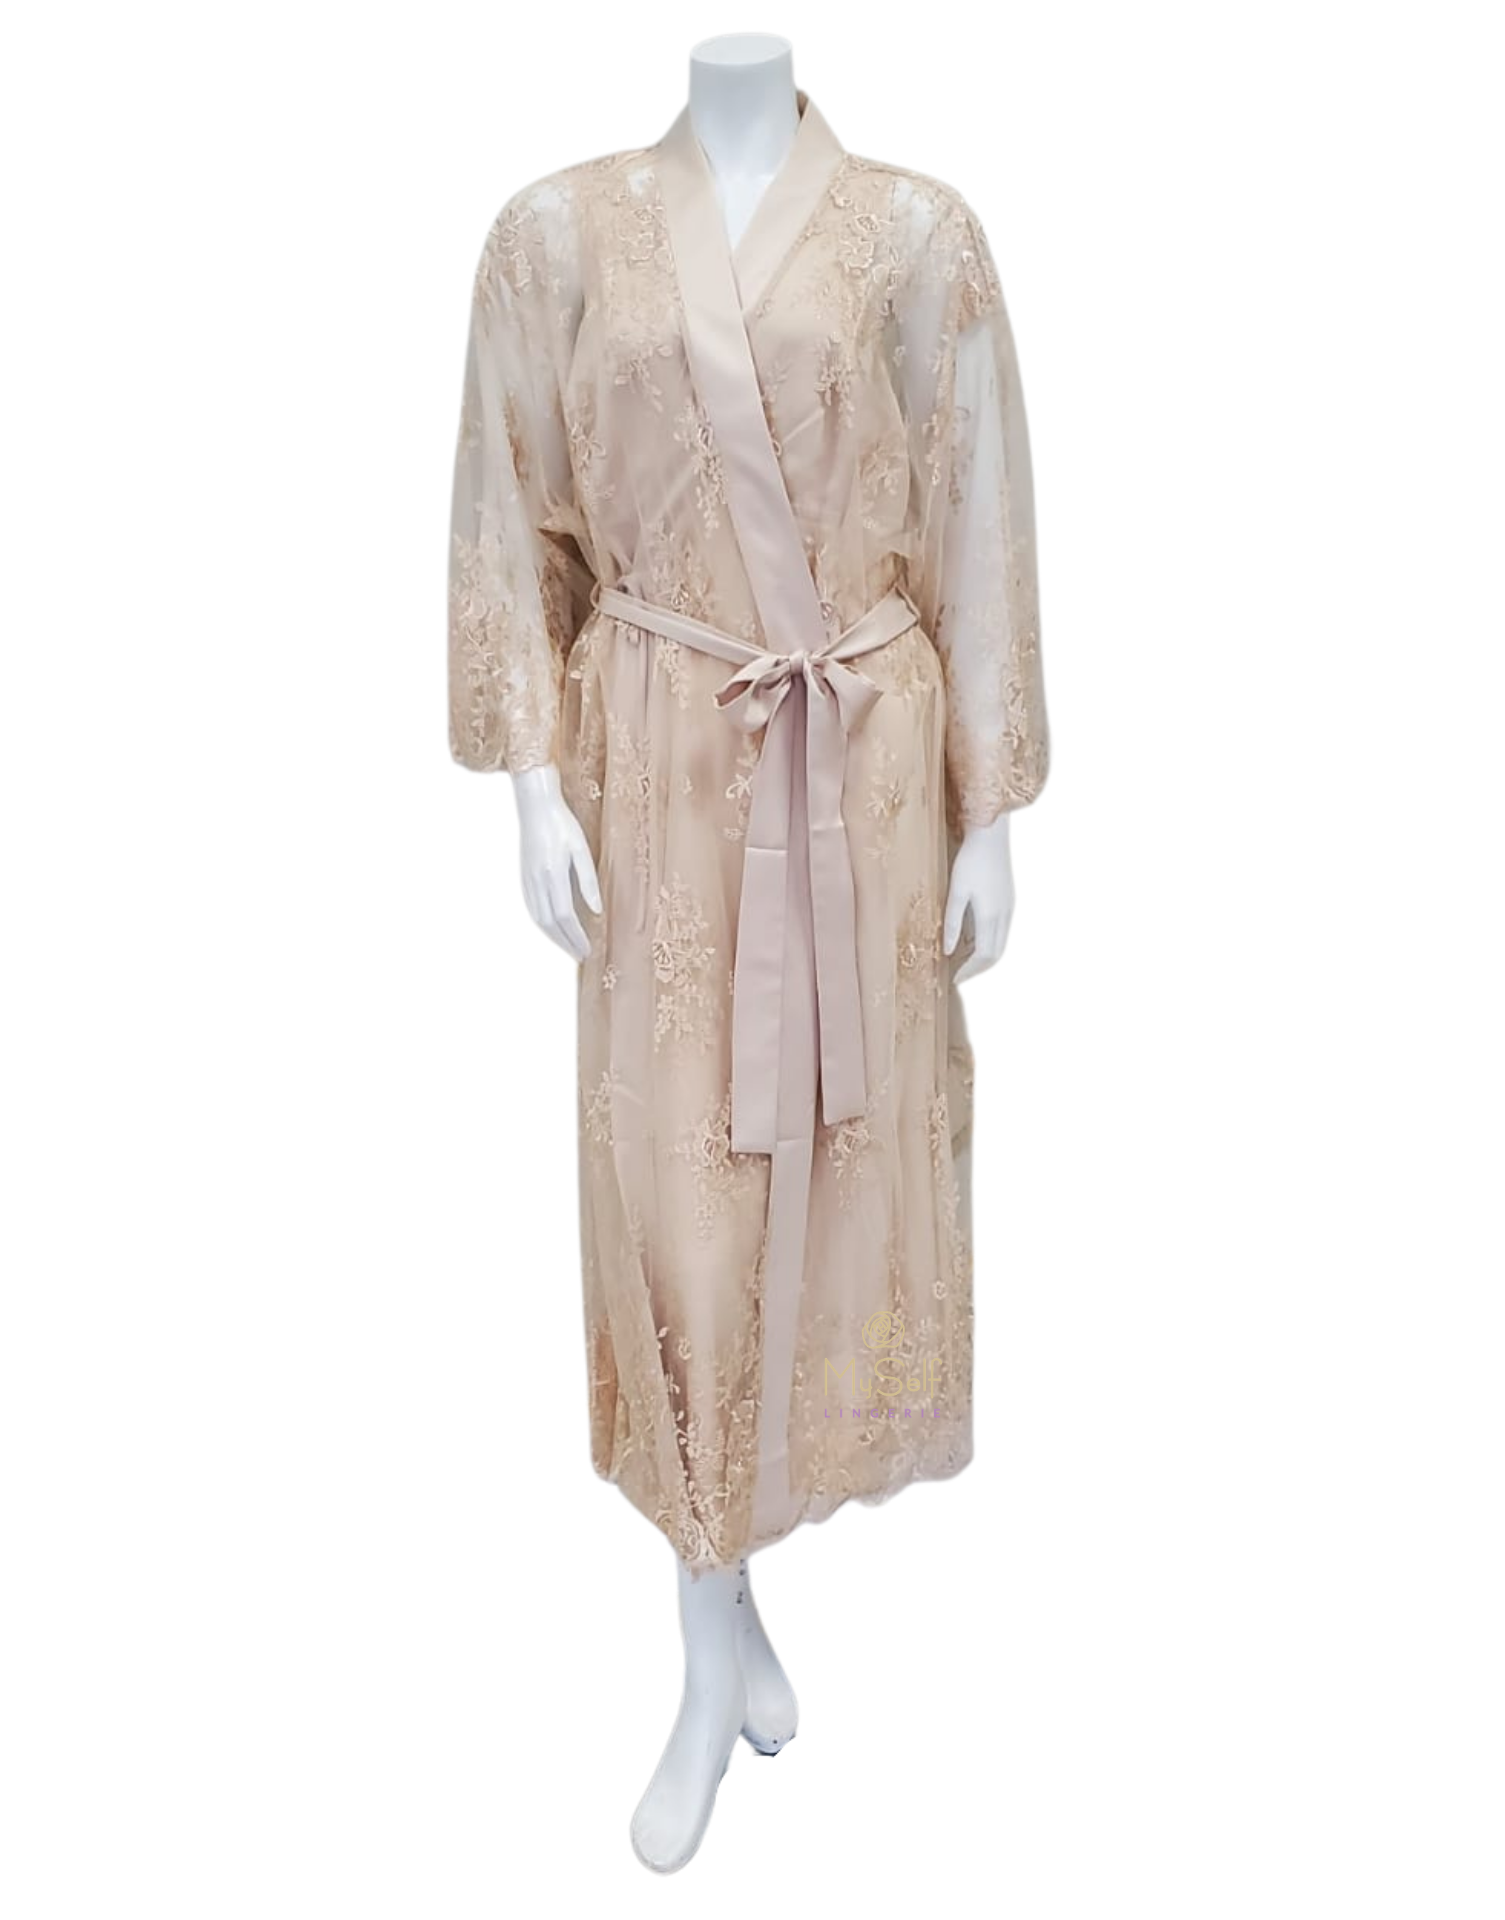 Rya Collection 220X Champagne Darling Embroidered Lace Robe Plus Sizes myselflingerie.com